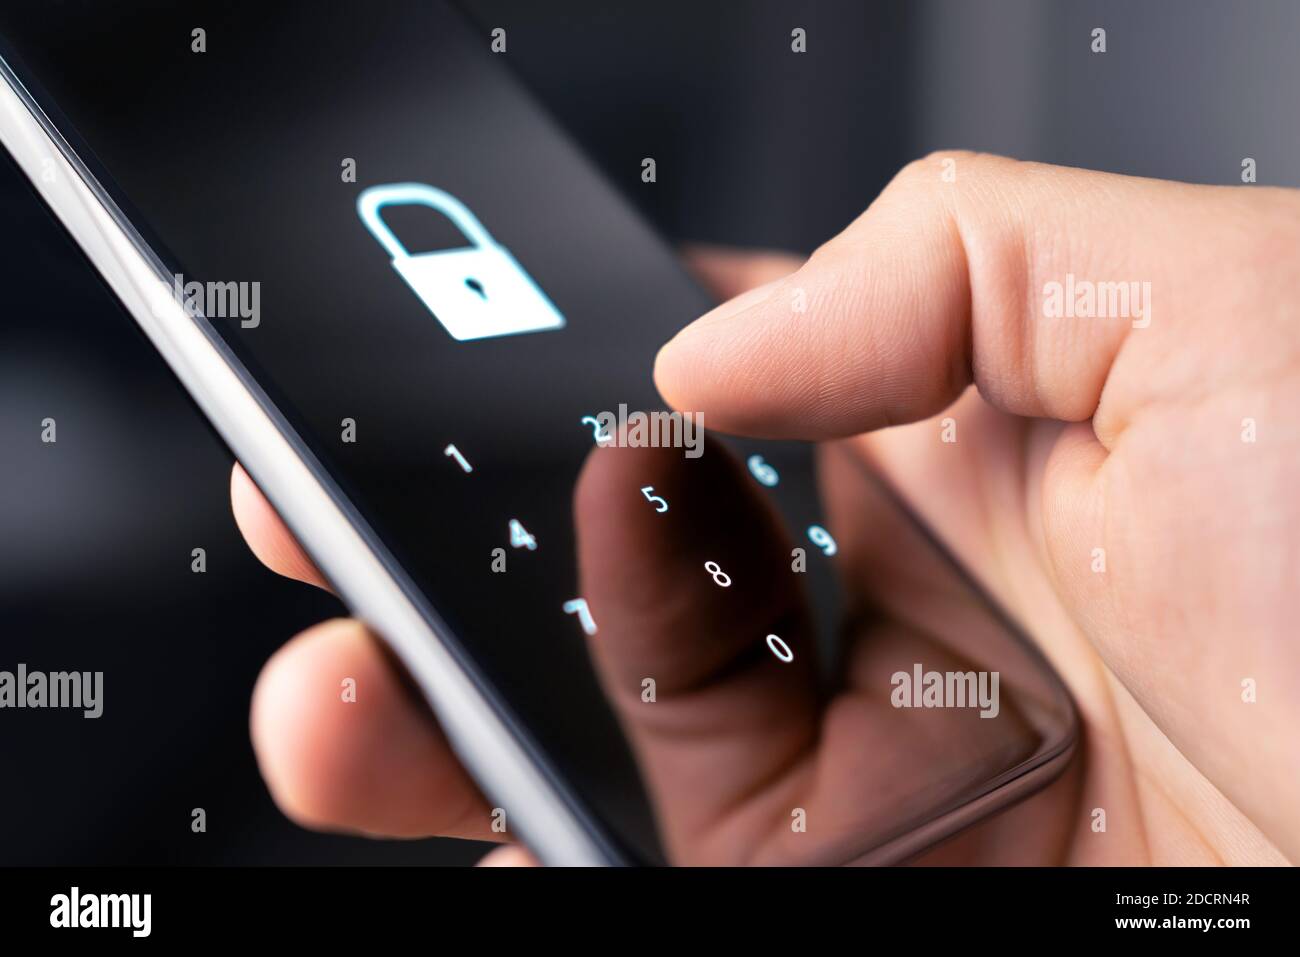 Mobile phone security code, password or lock for personal online privacy and verification. 2FA (two factor authentication) and passcode for data. Stock Photo